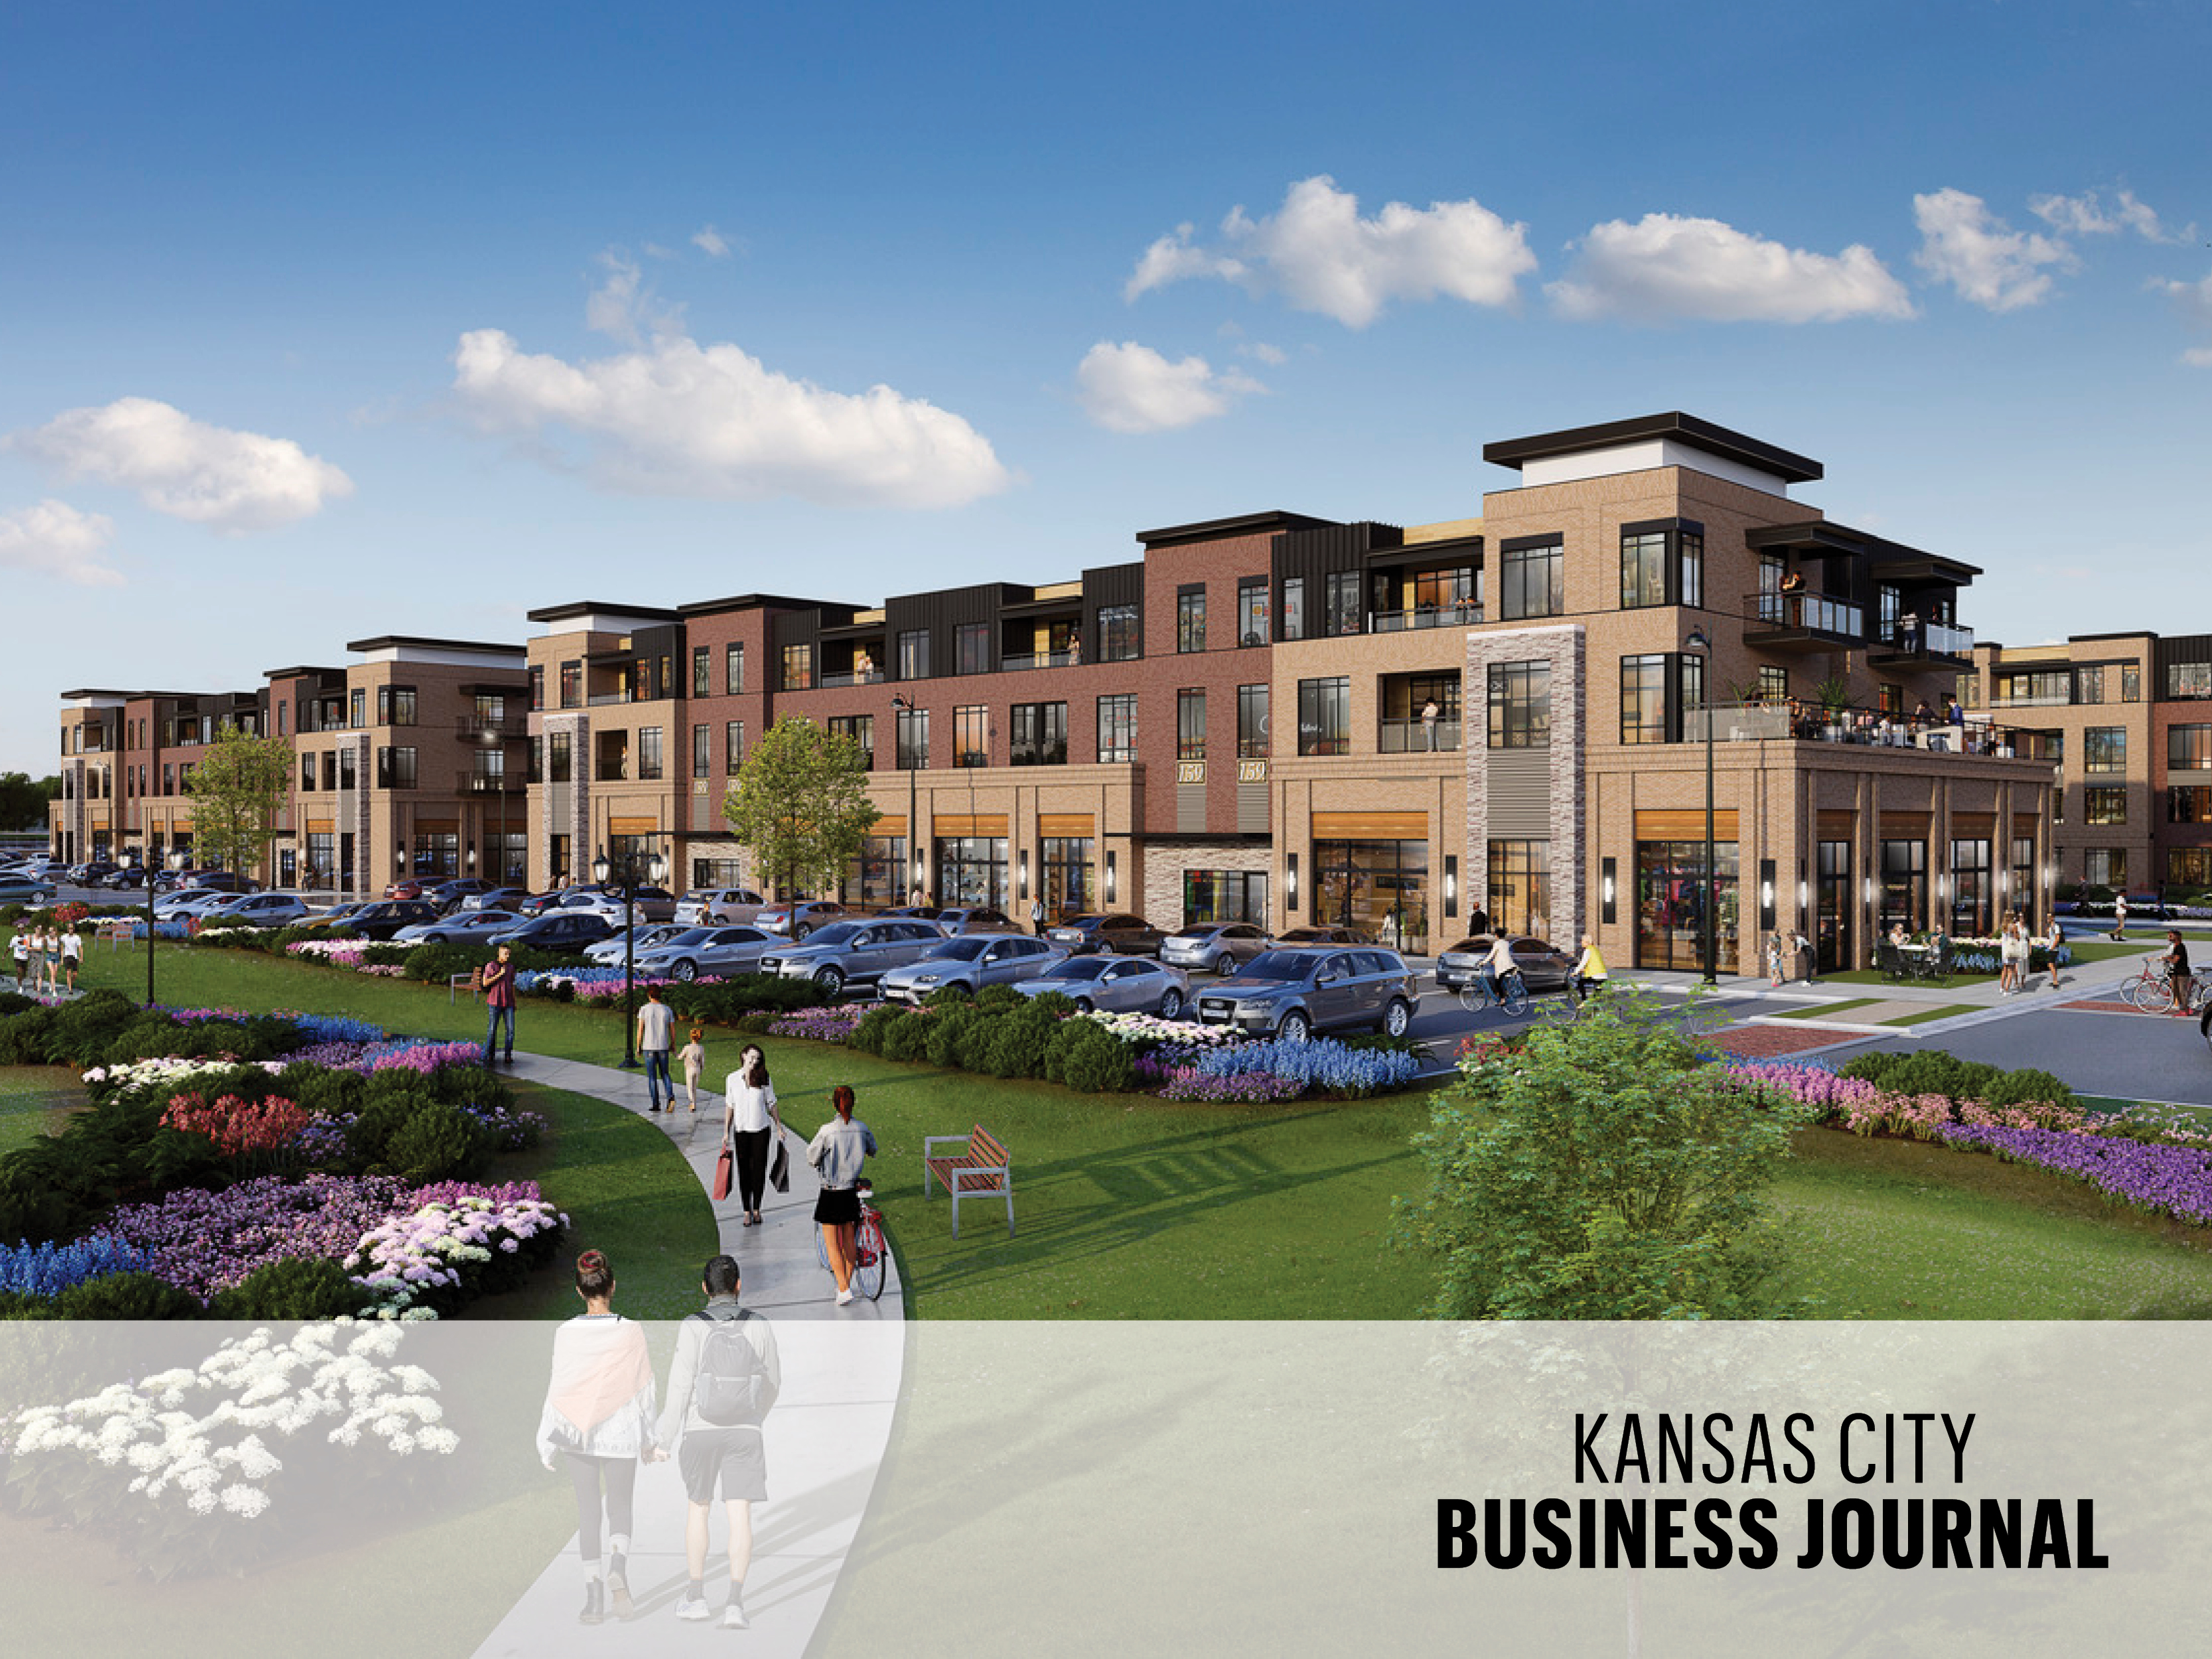 Lux Living wins approval for more than 900 apartments in Overland Park